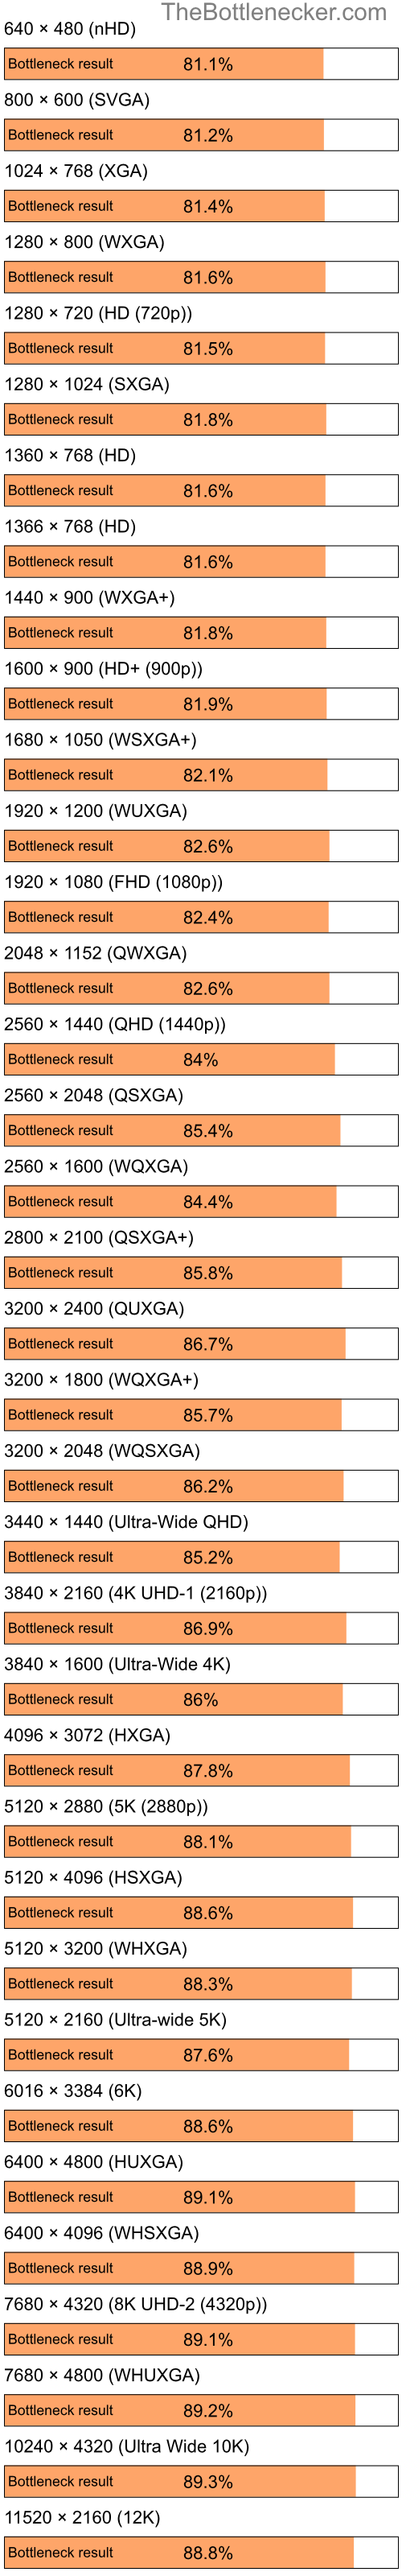 Bottleneck results by resolution for Intel Celeron M 410 and NVIDIA nForce 620i in Graphic Card Intense Tasks